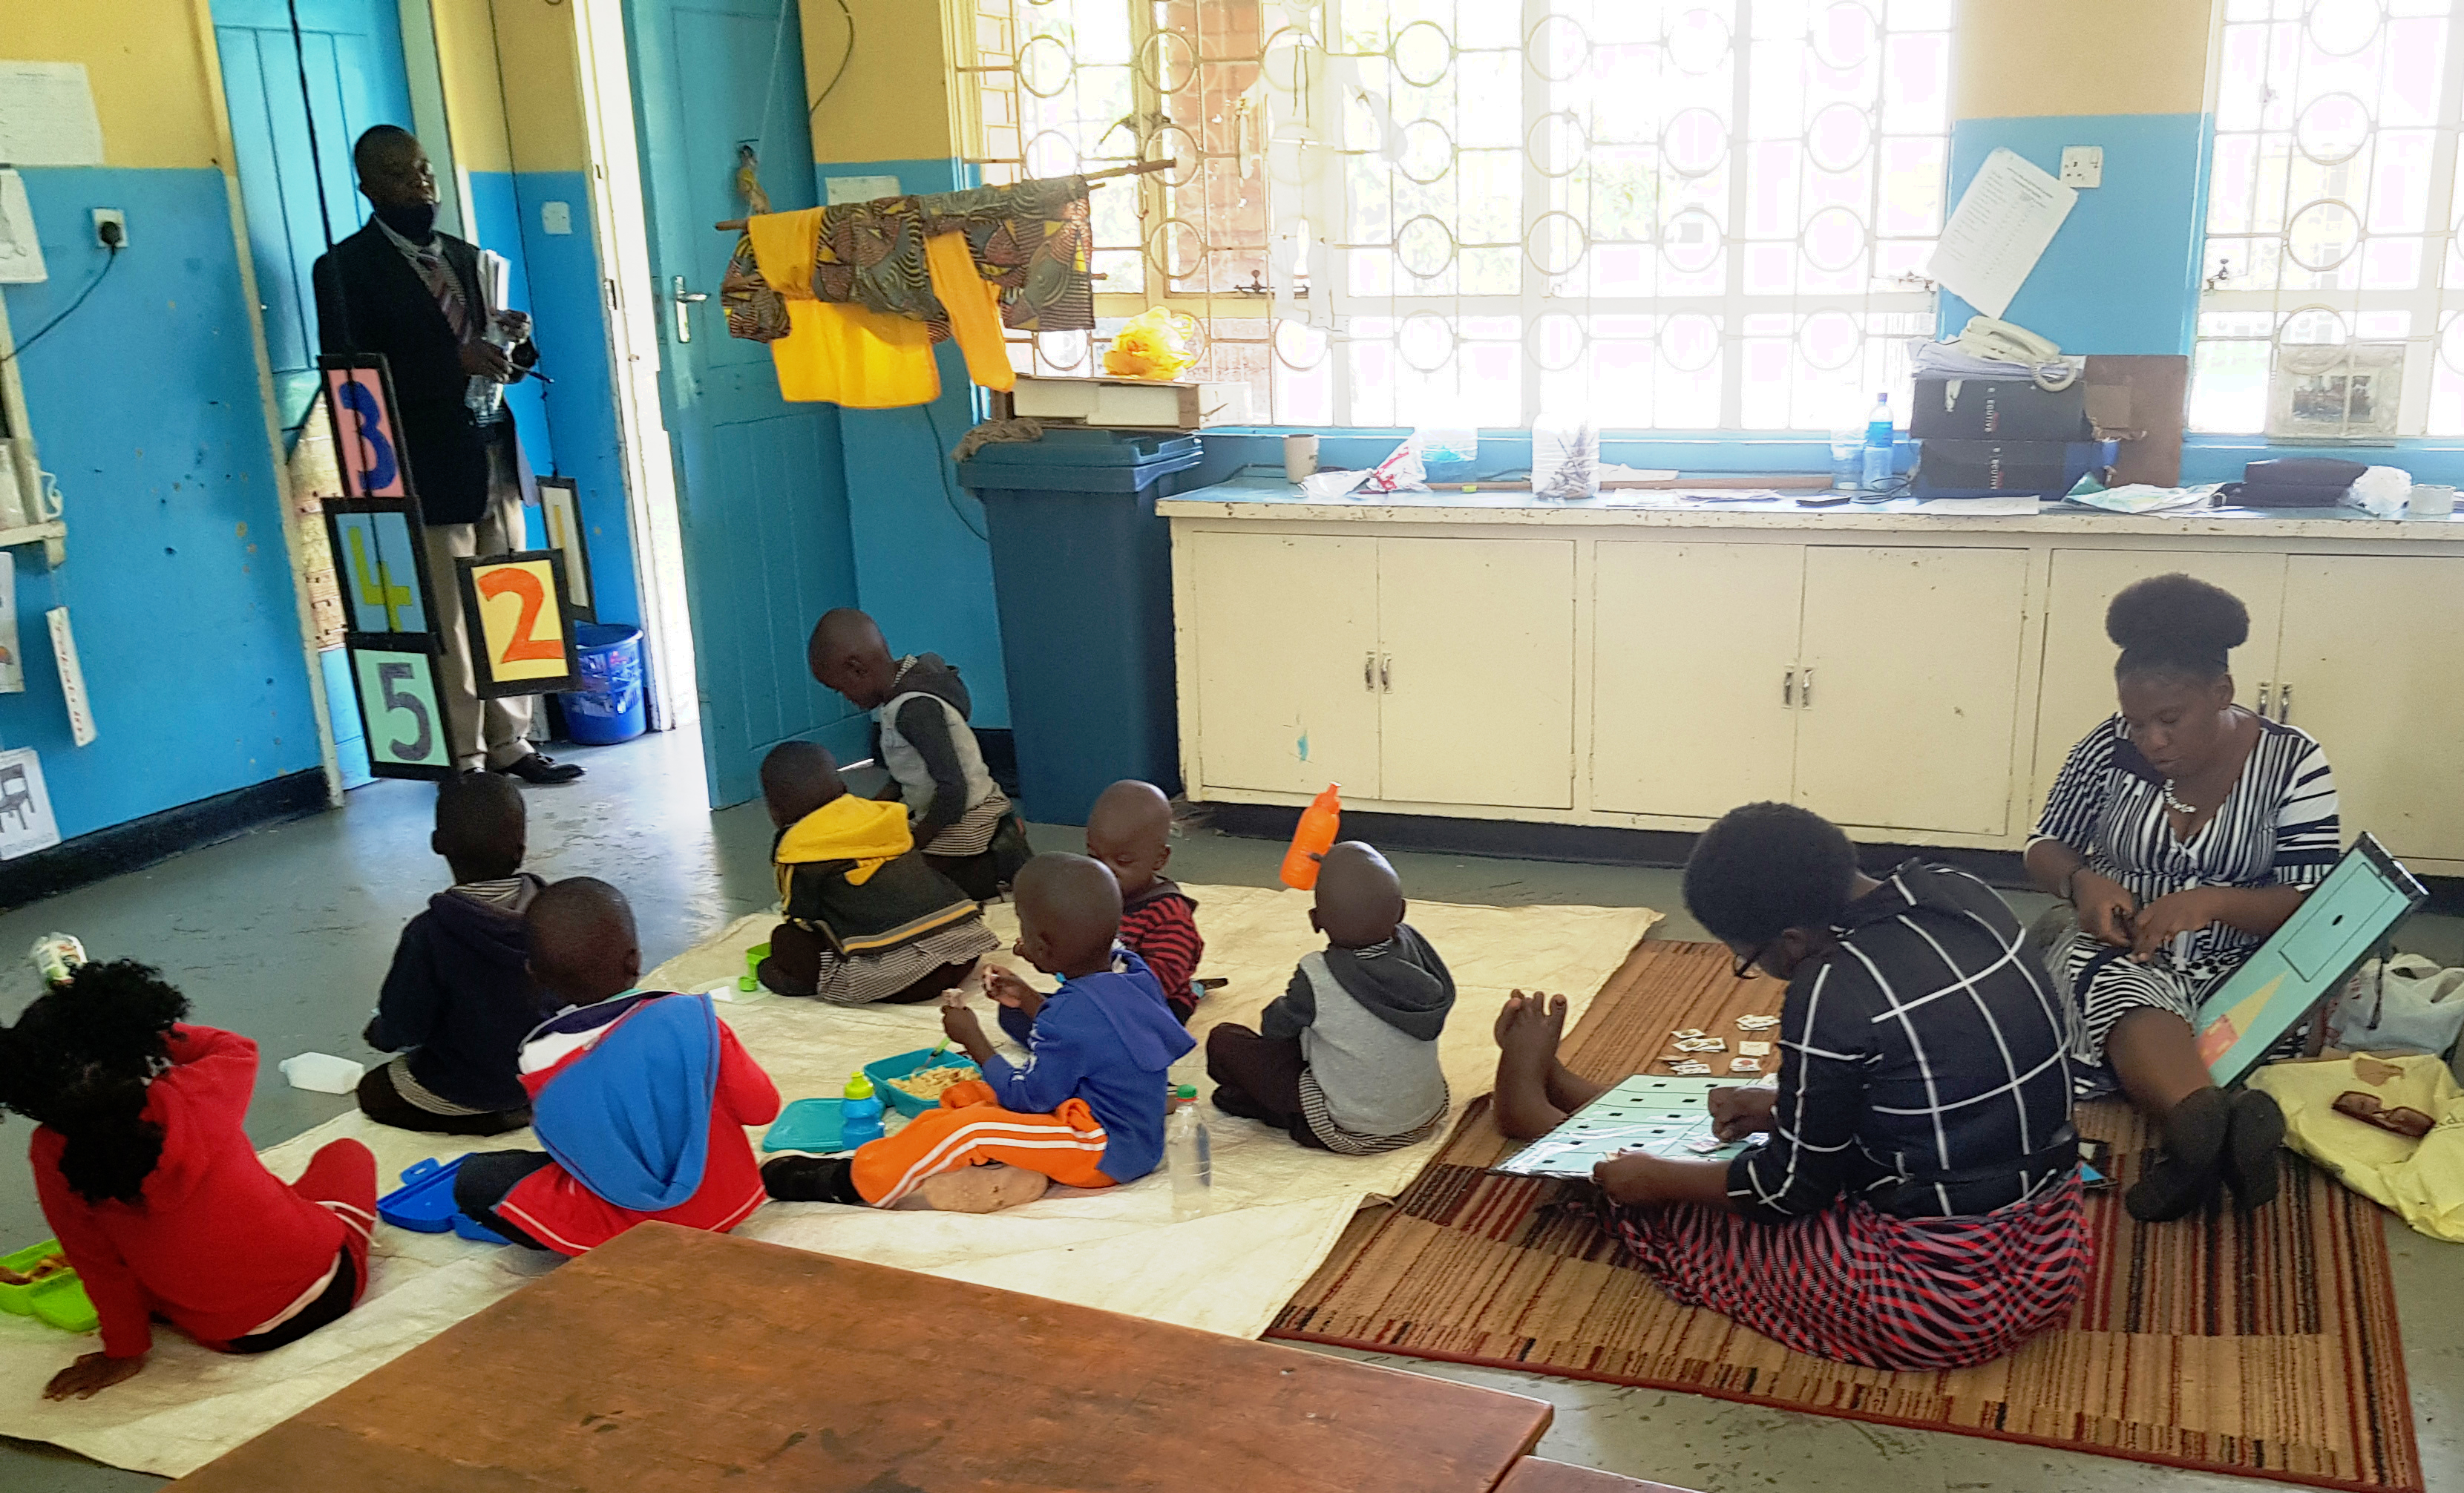 "Young students in a classroom in Zambia sitting on the floor. There are two techers sitting behind the children working and an educator standing at the door at the front of the room"